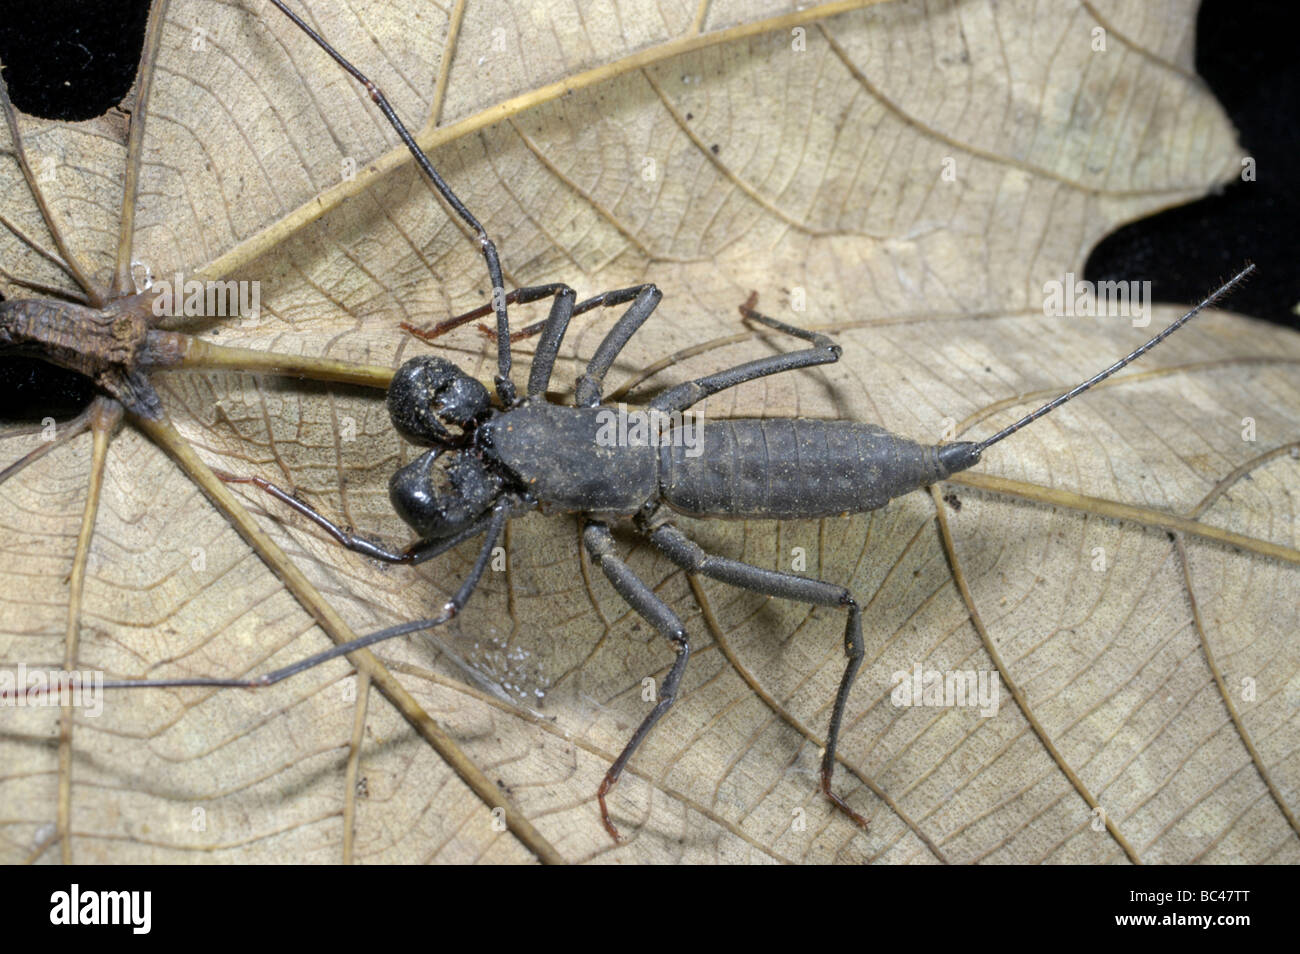 Whip Scorpion on a leaf. It has been injured and is missing one of its eight legs Stock Photo